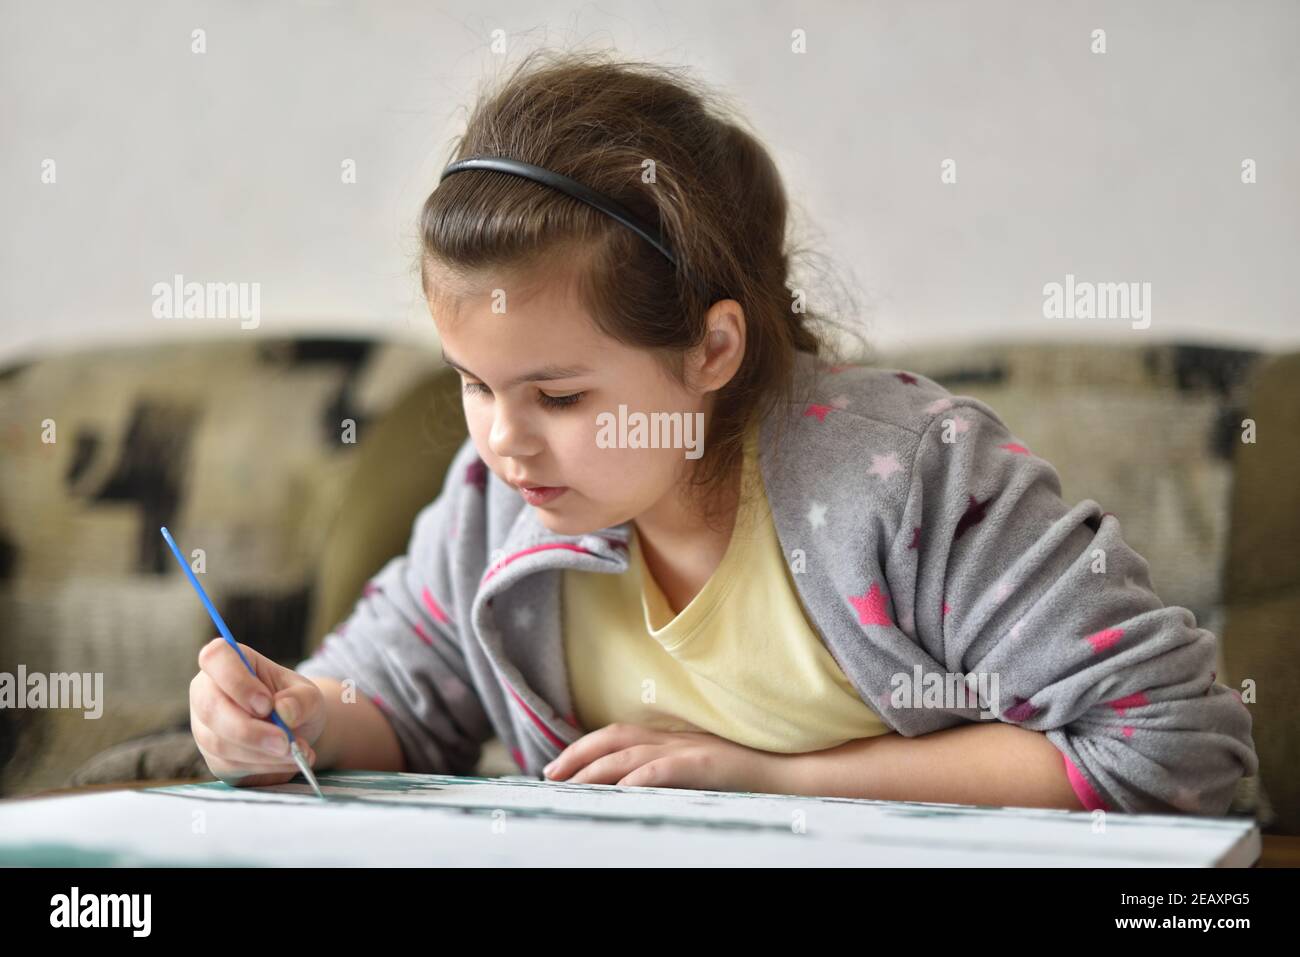 Child girl of 9 years old draws a picture with paints at home Stock Photo